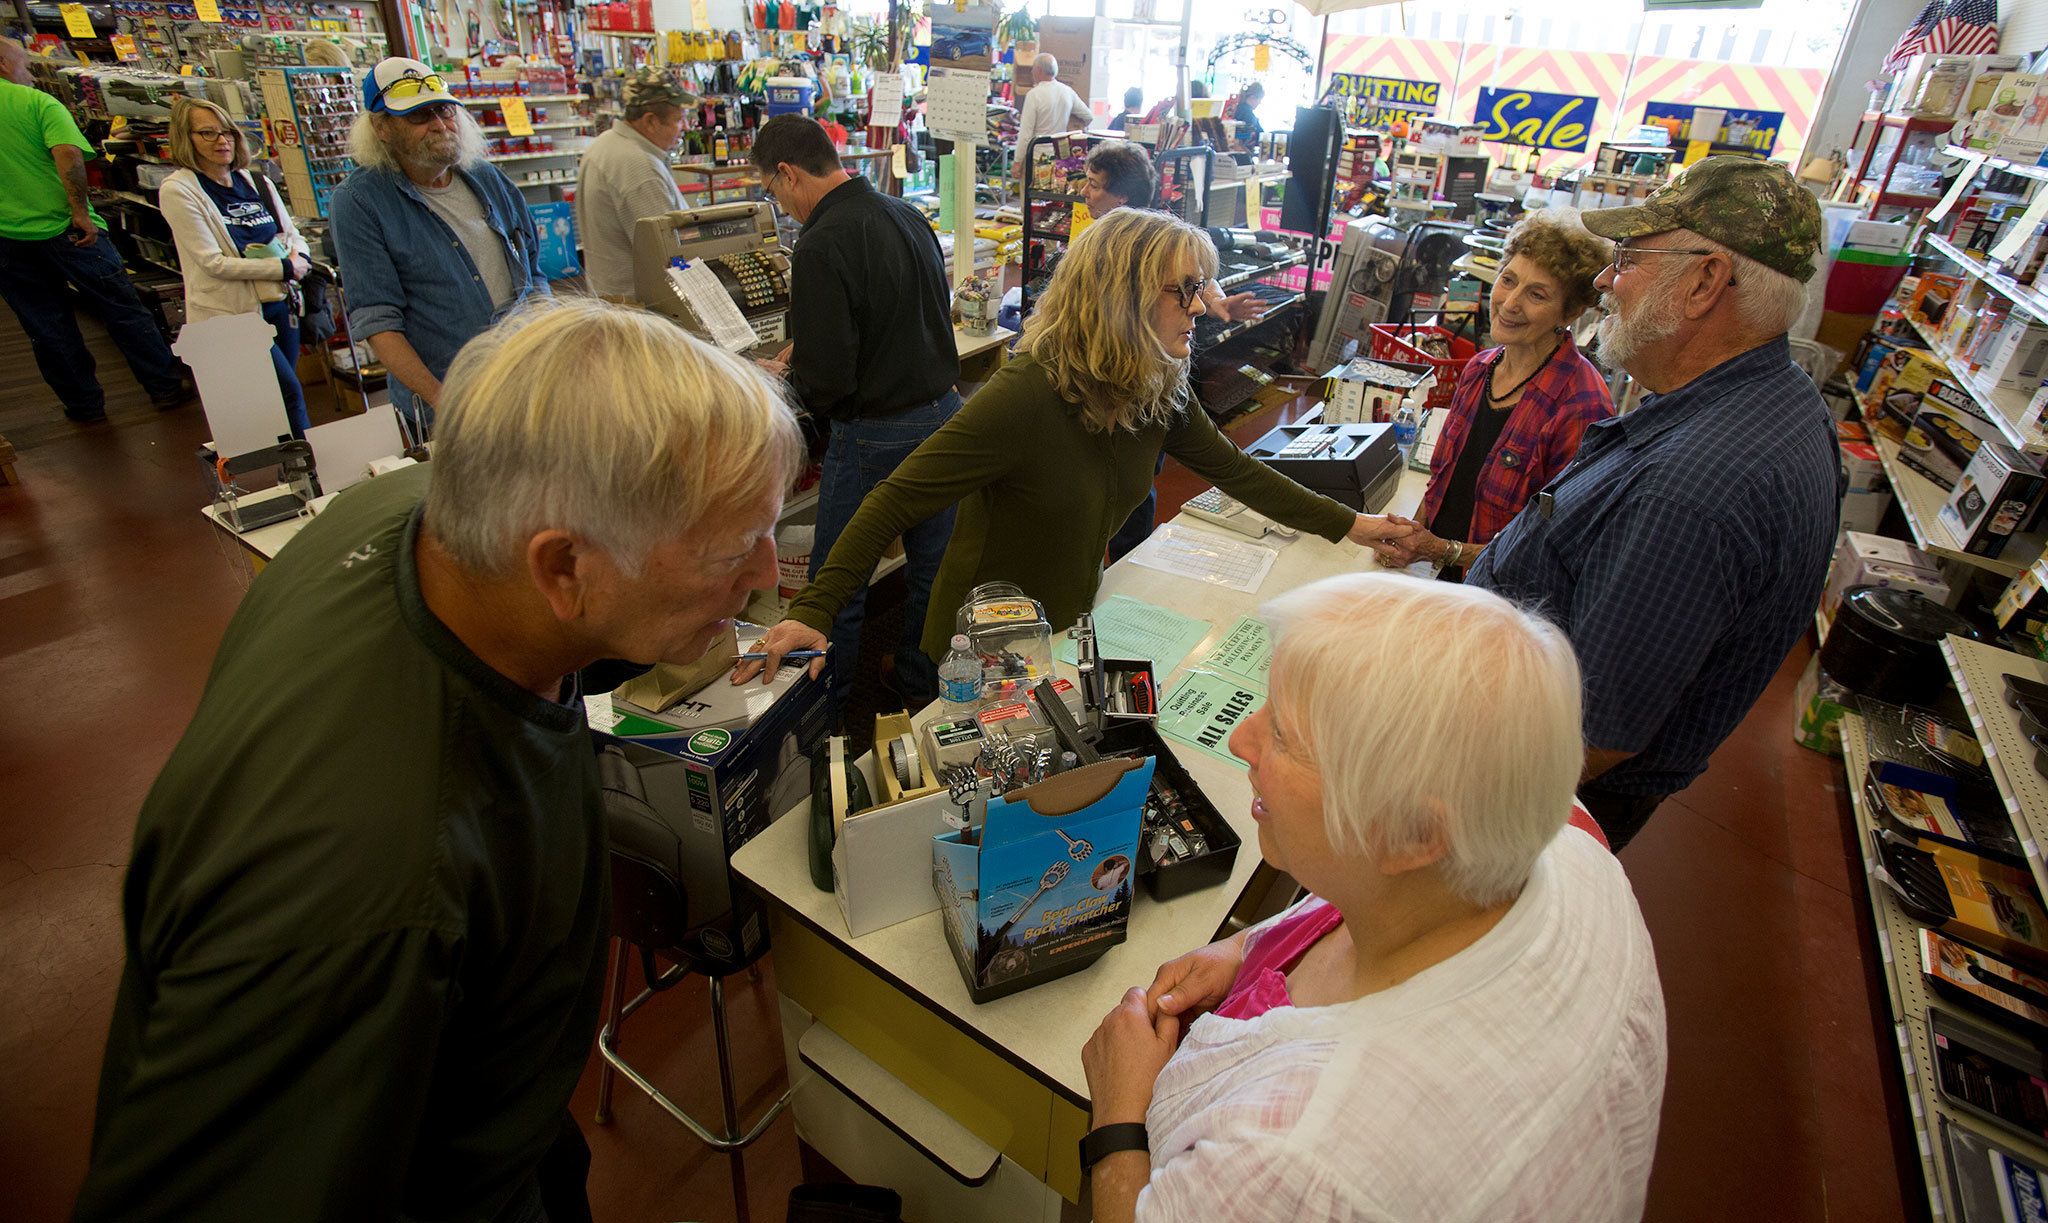 Gail Libbing (center), the third generation of the family to own the store, holds the hand of her mother, Darlene Scott, while talking with long-time customer Al Hendrickson at Carr’s Hardware on Friday in Marysville. Carr’s Hardware is closing after 93 years in business. (Andy Bronson / The Herald)